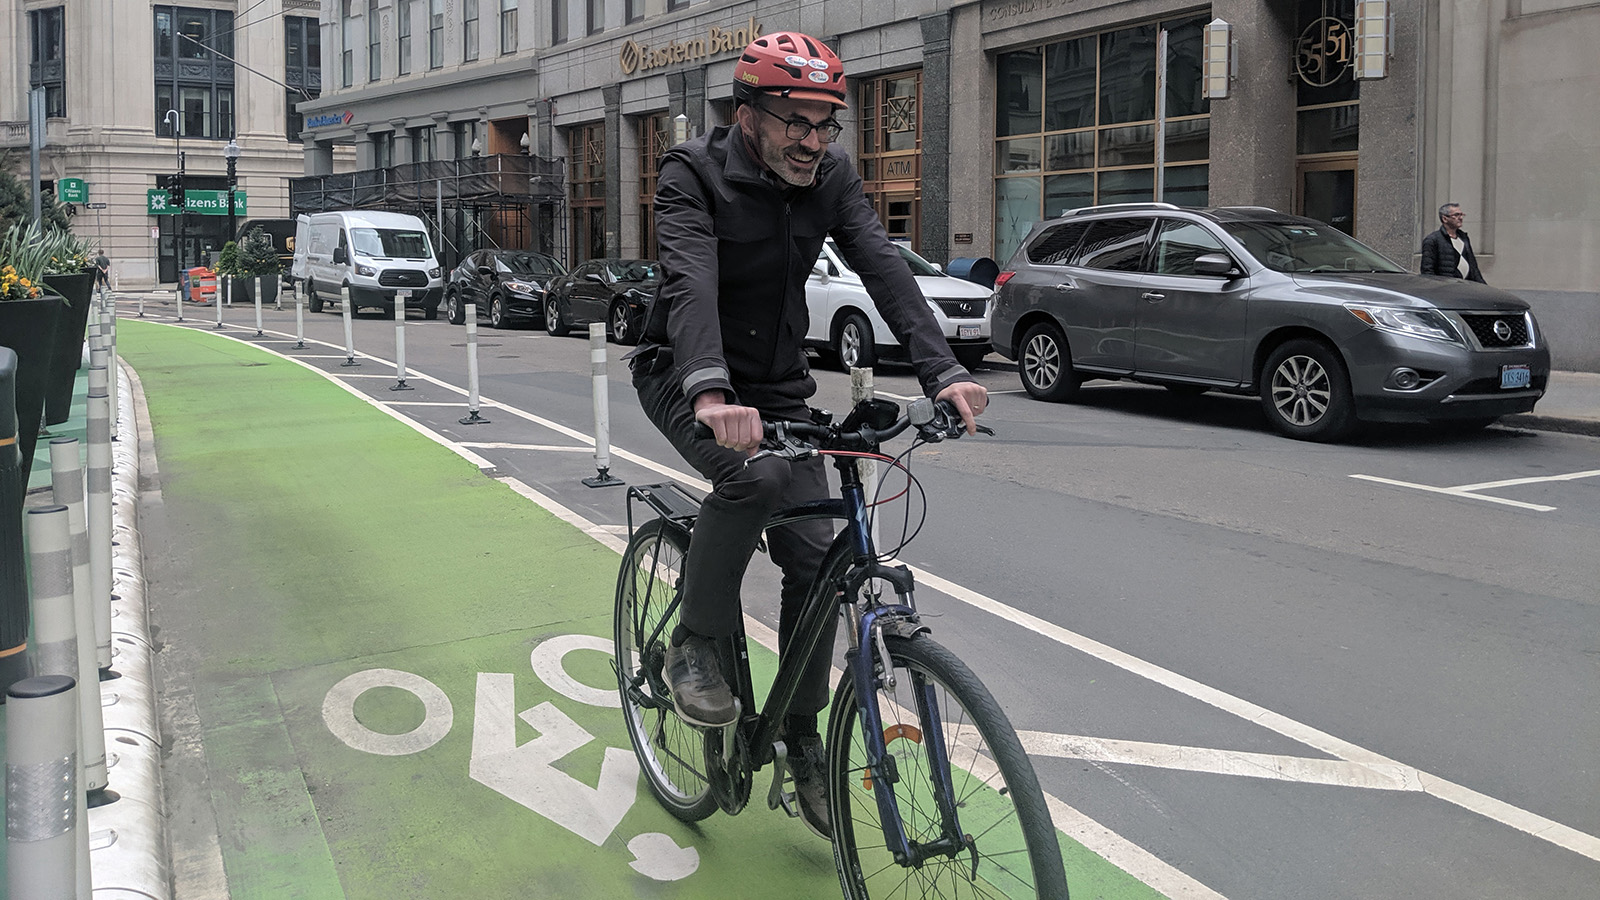 <h4>TO GET TO ZERO CARBON: DRIVE LESS, LIVE MORE</h4><h5>Our goal is to double the number of people who travel on foot, bike or public transit by 2030.</h5><em>Jennifer Newman</em>